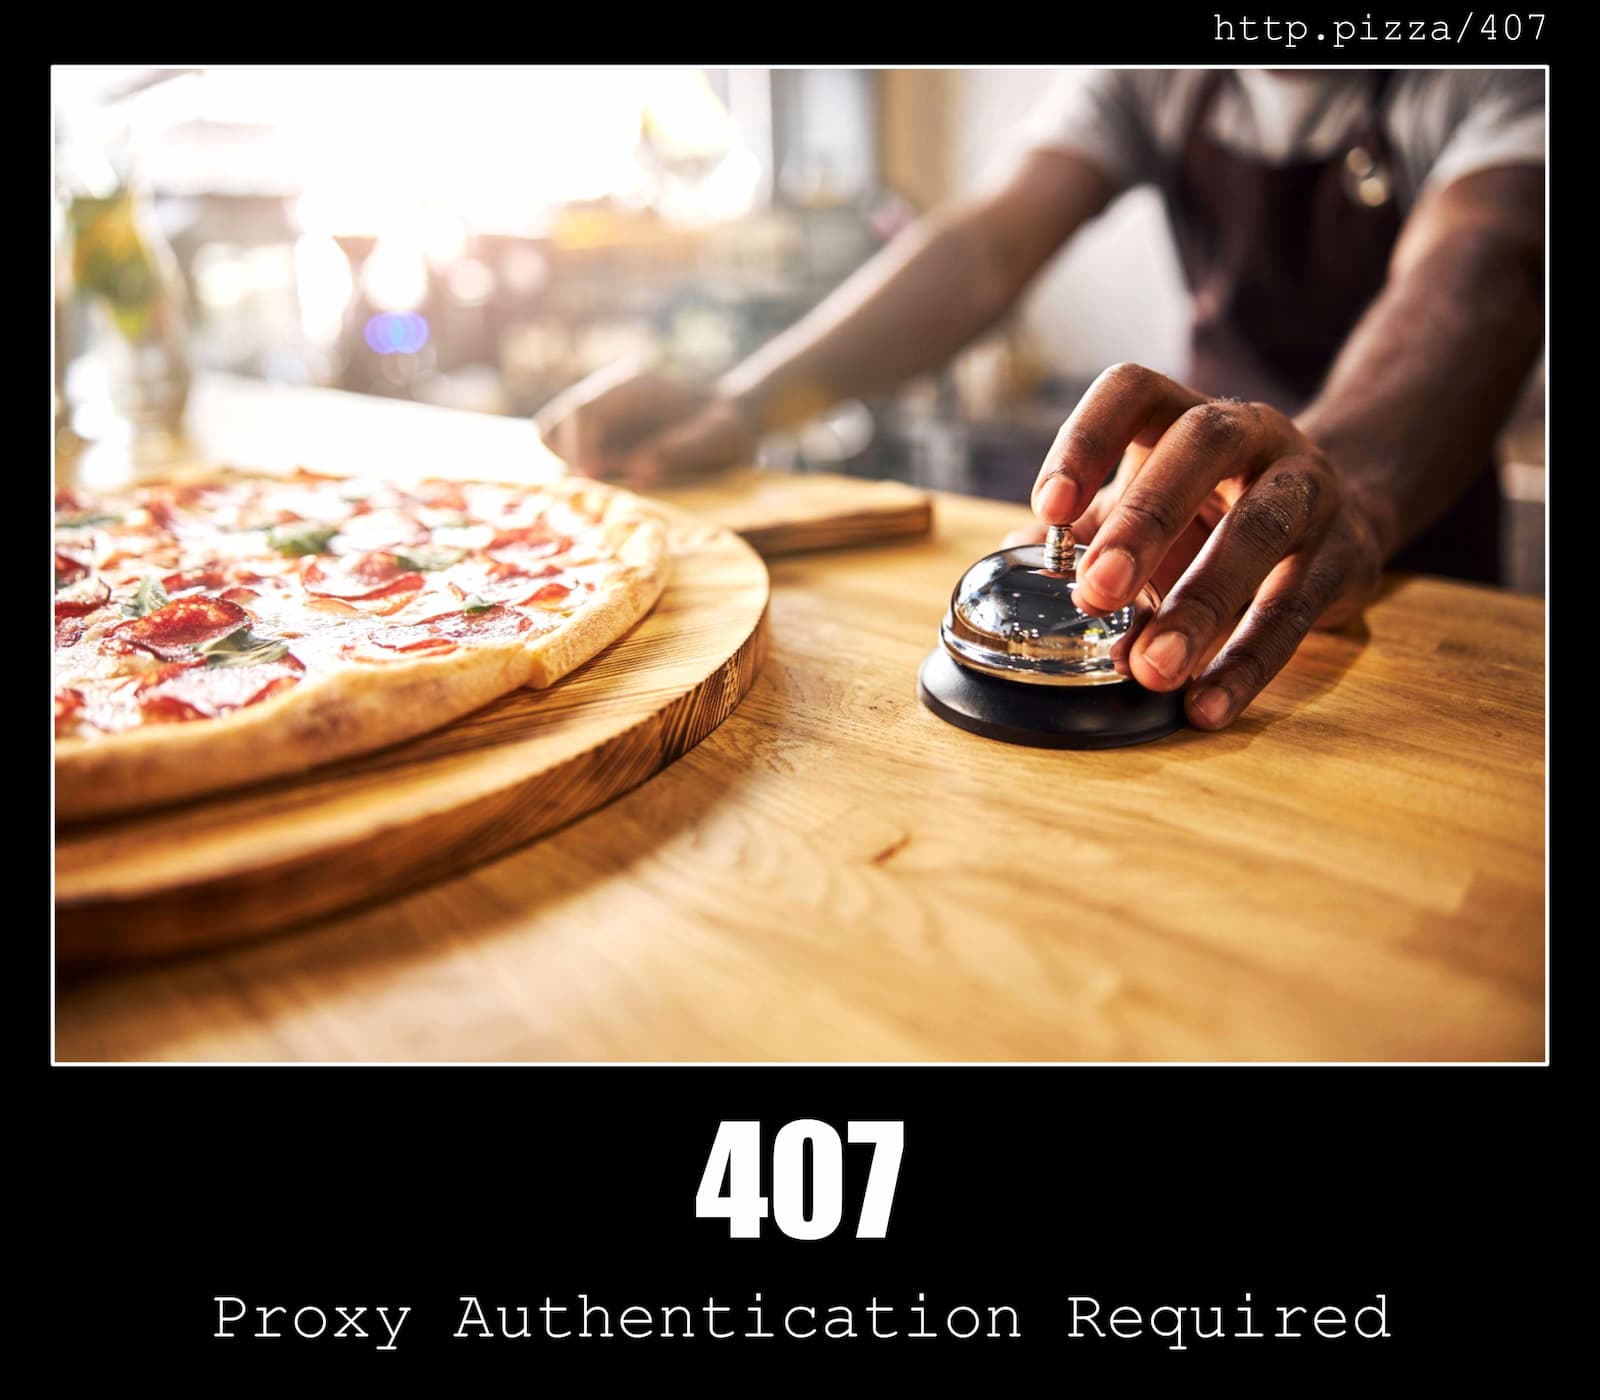 HTTP Status Code 407 Proxy Authentication Required & Pizzas